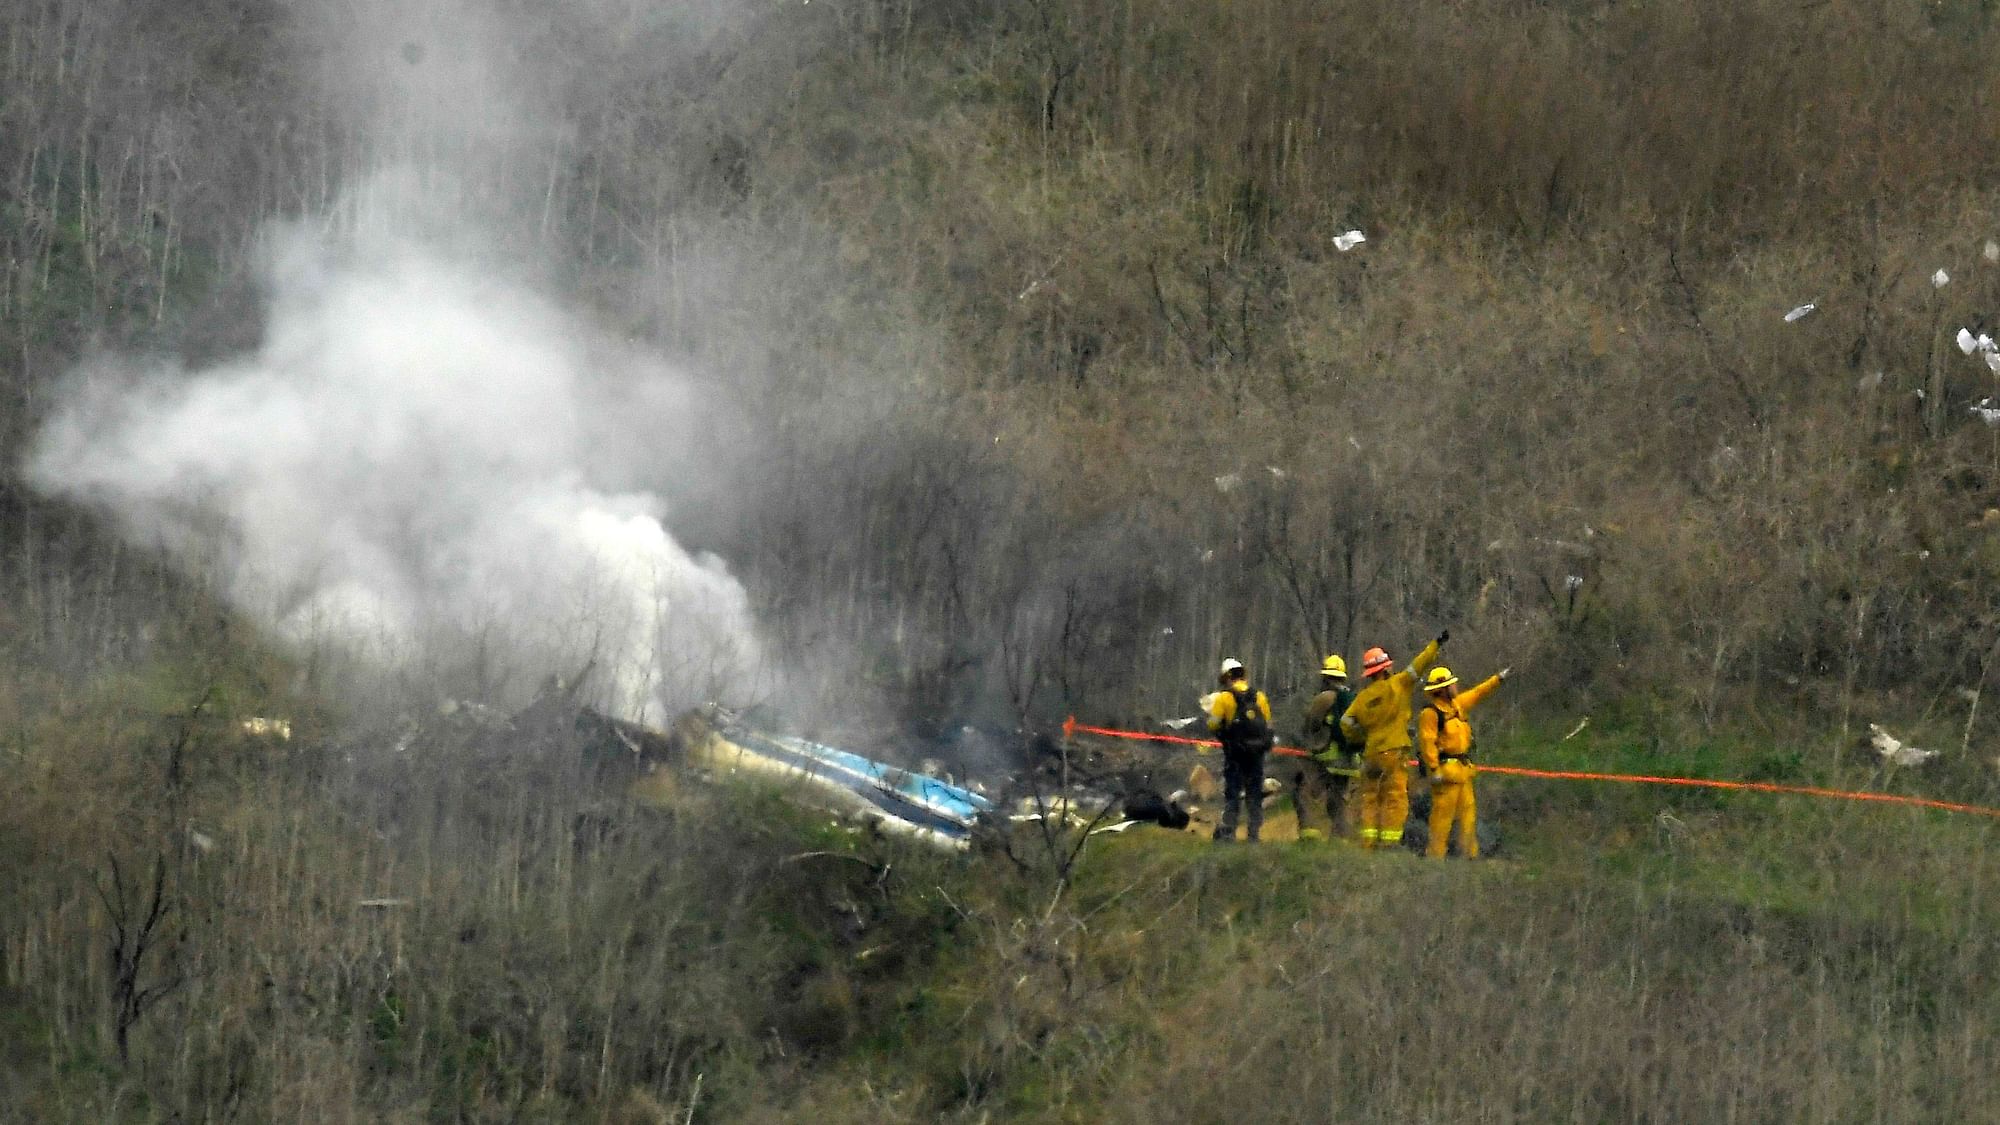 Investigators have recovered all of the nine bodies from the site of the helicopter crash which killed retired NBA star Kobe Bryant and his teenage daughter, authorities said.